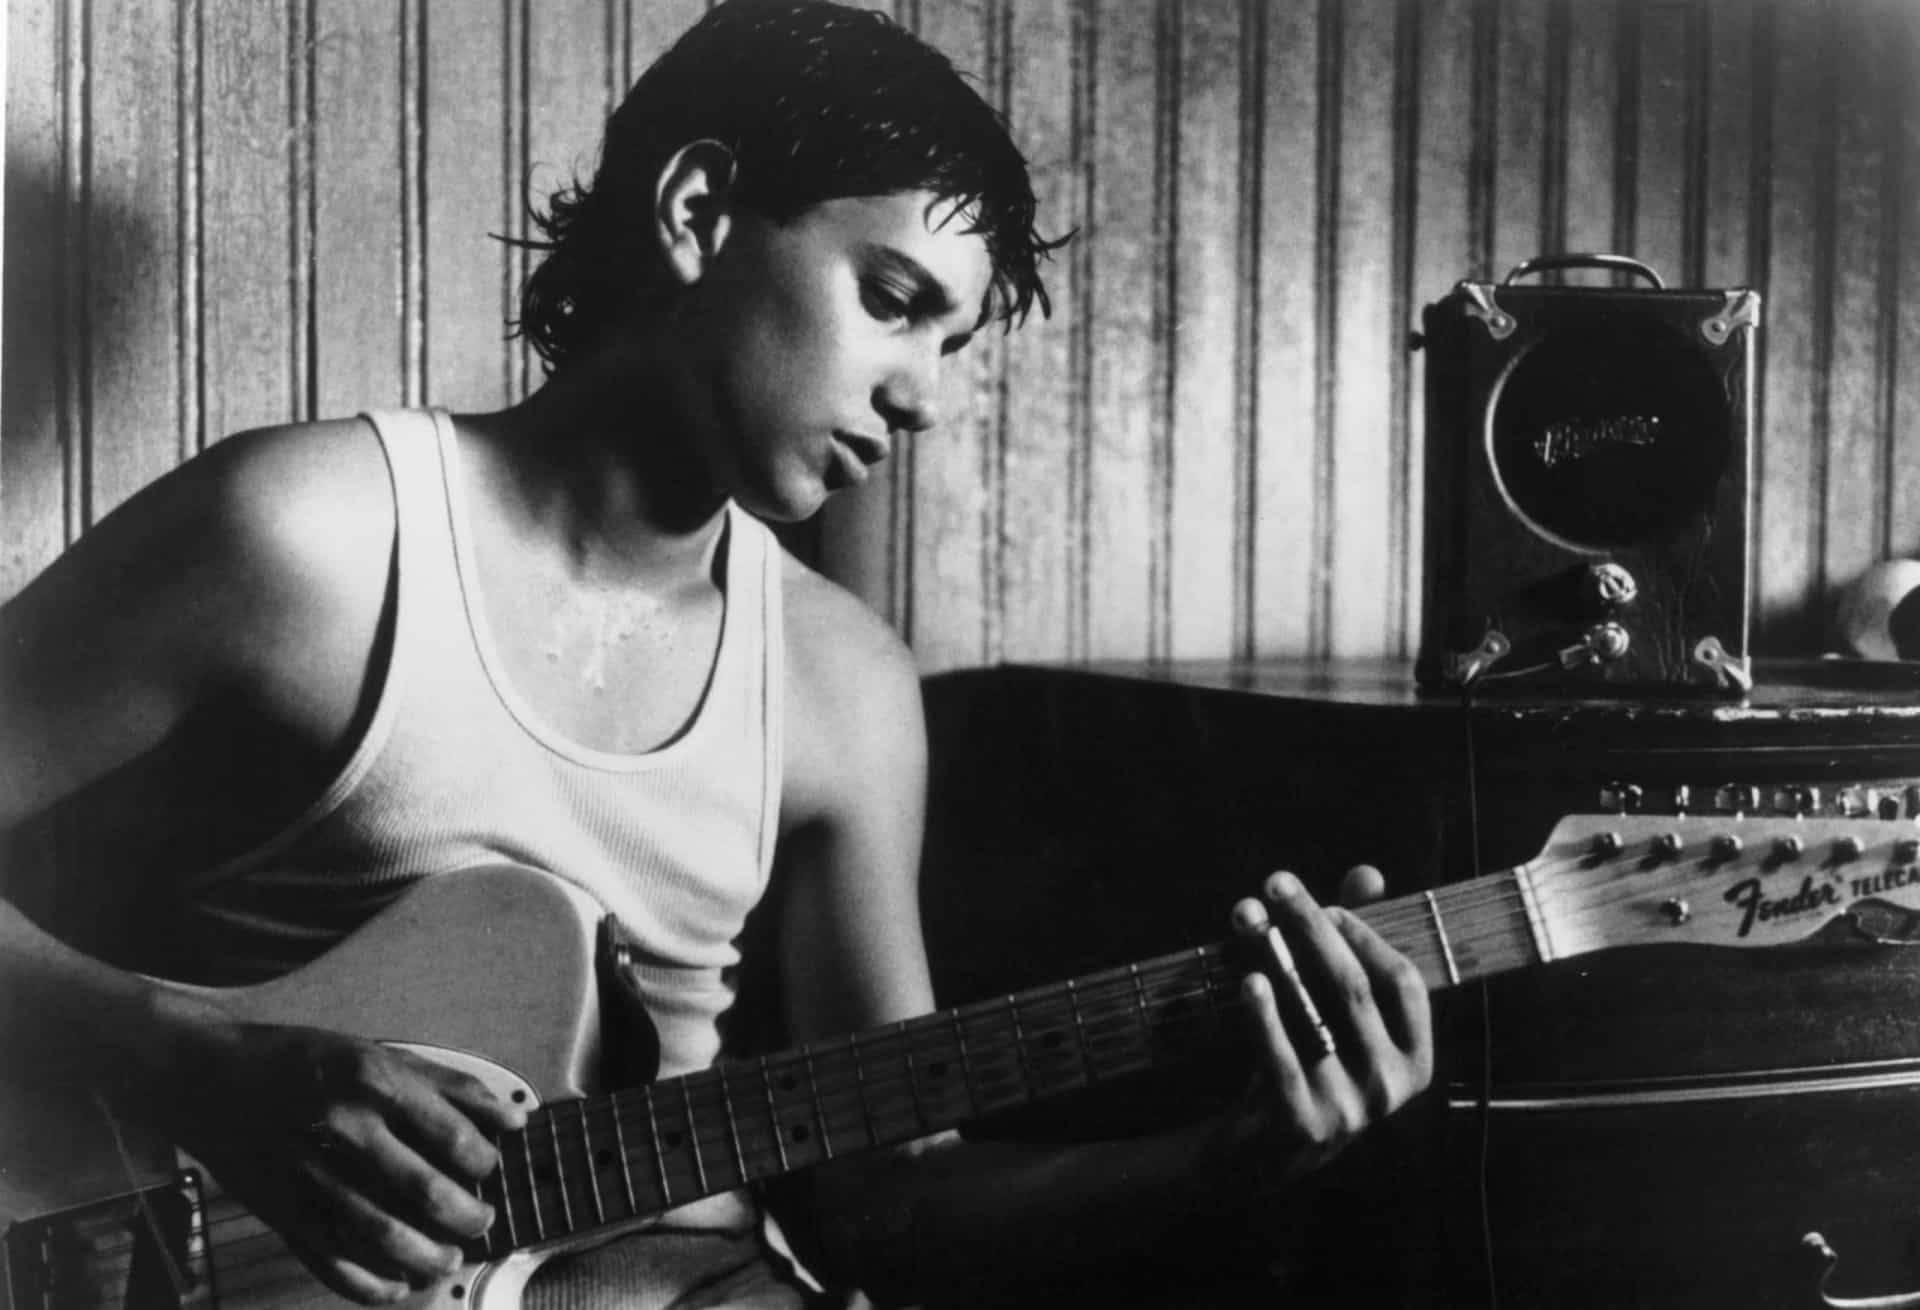 <p>This 1986 movie stars Ralph Macchio as a guitar player with a passion for blues (and features an epic guitar solo battle between his character and guitar virtuoso Steve Vai).</p><p><a href="https://www.msn.com/en-us/community/channel/vid-7xx8mnucu55yw63we9va2gwr7uihbxwc68fxqp25x6tg4ftibpra?cvid=94631541bc0f4f89bfd59158d696ad7e">Follow us and access great exclusive content everyday</a></p>